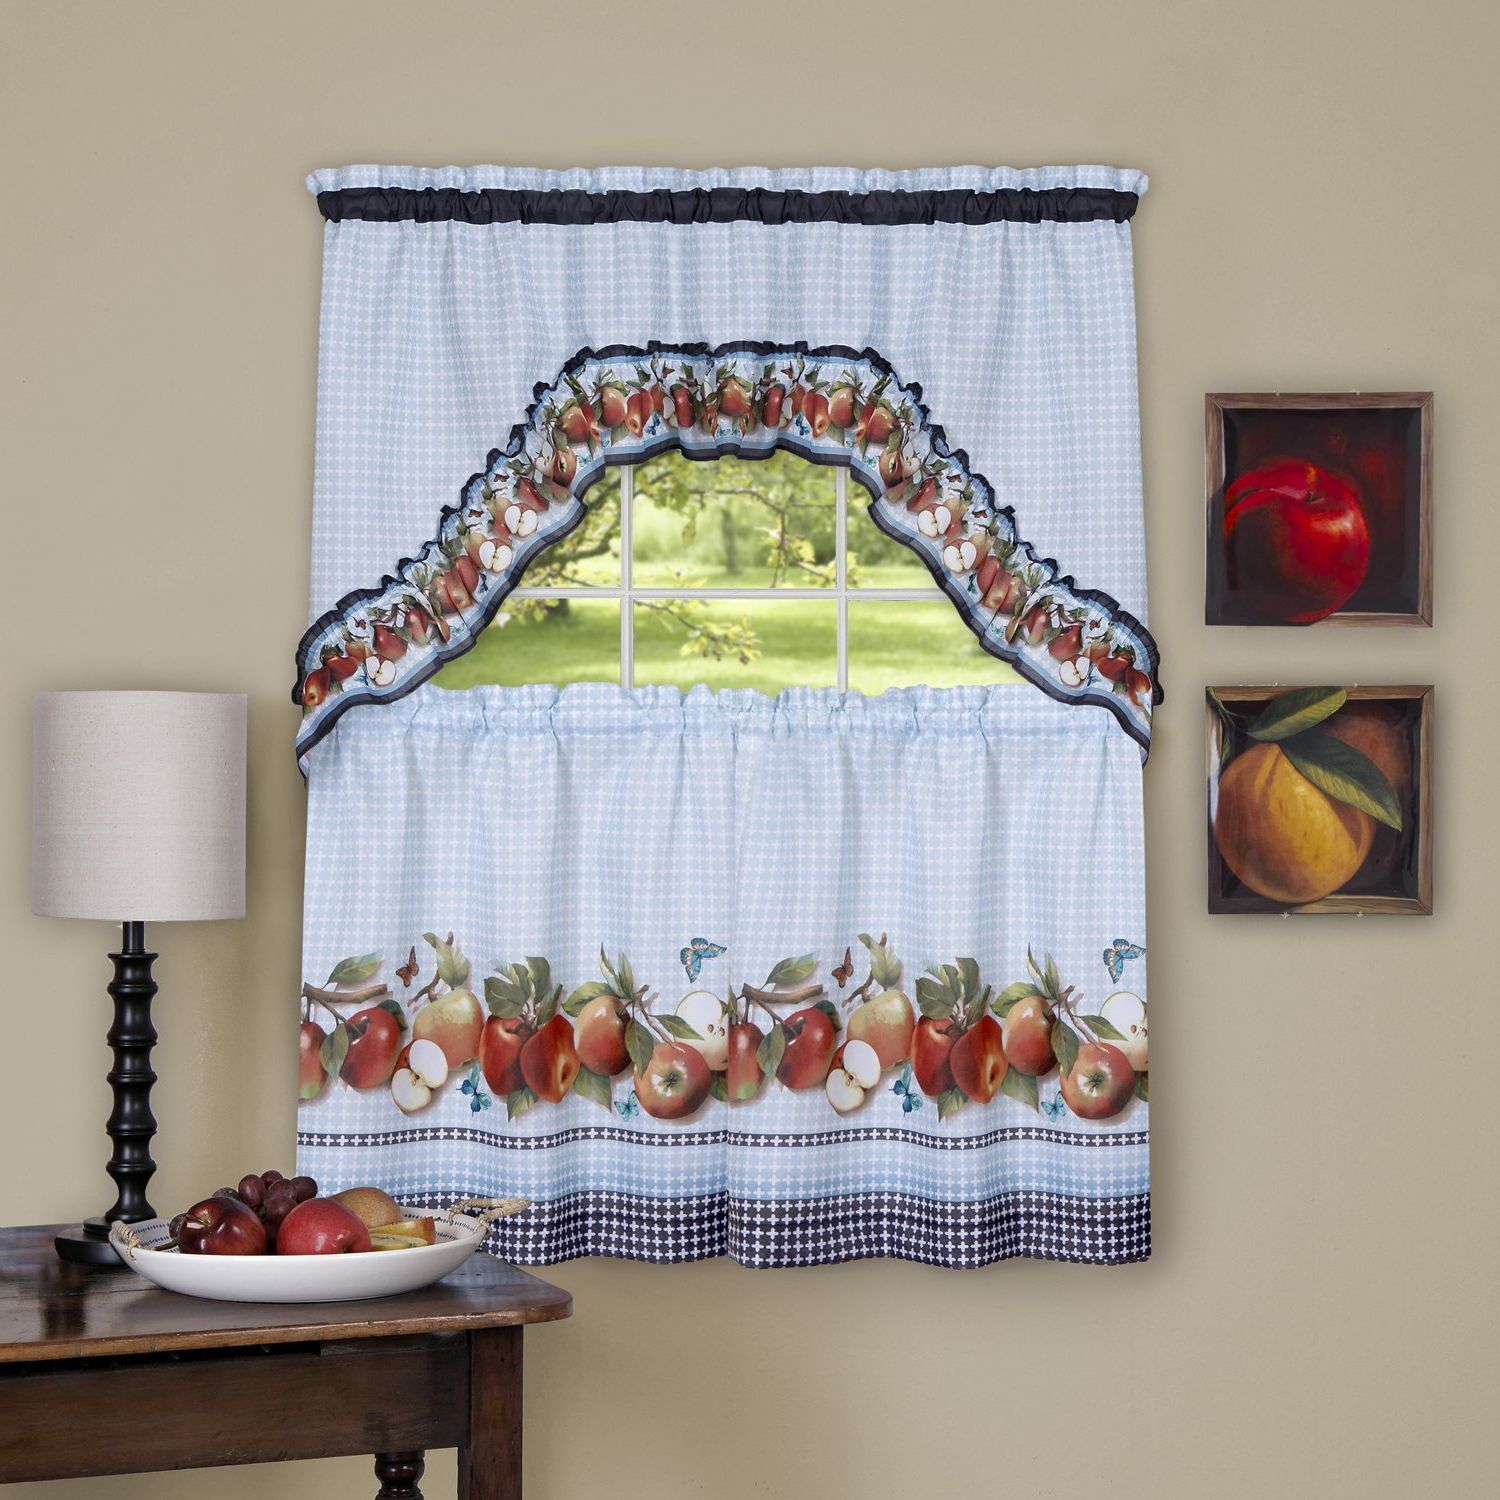 Newest Achim Home Furnishings Gdts36ib12 Golden Delicious Window Curtain Tier &  Swag Set, 57 Inch X 36 Inch, Ice Blue, 57 X 36, Multicolor Within Delicious Apples Kitchen Curtain Tier And Valance Sets (View 4 of 20)